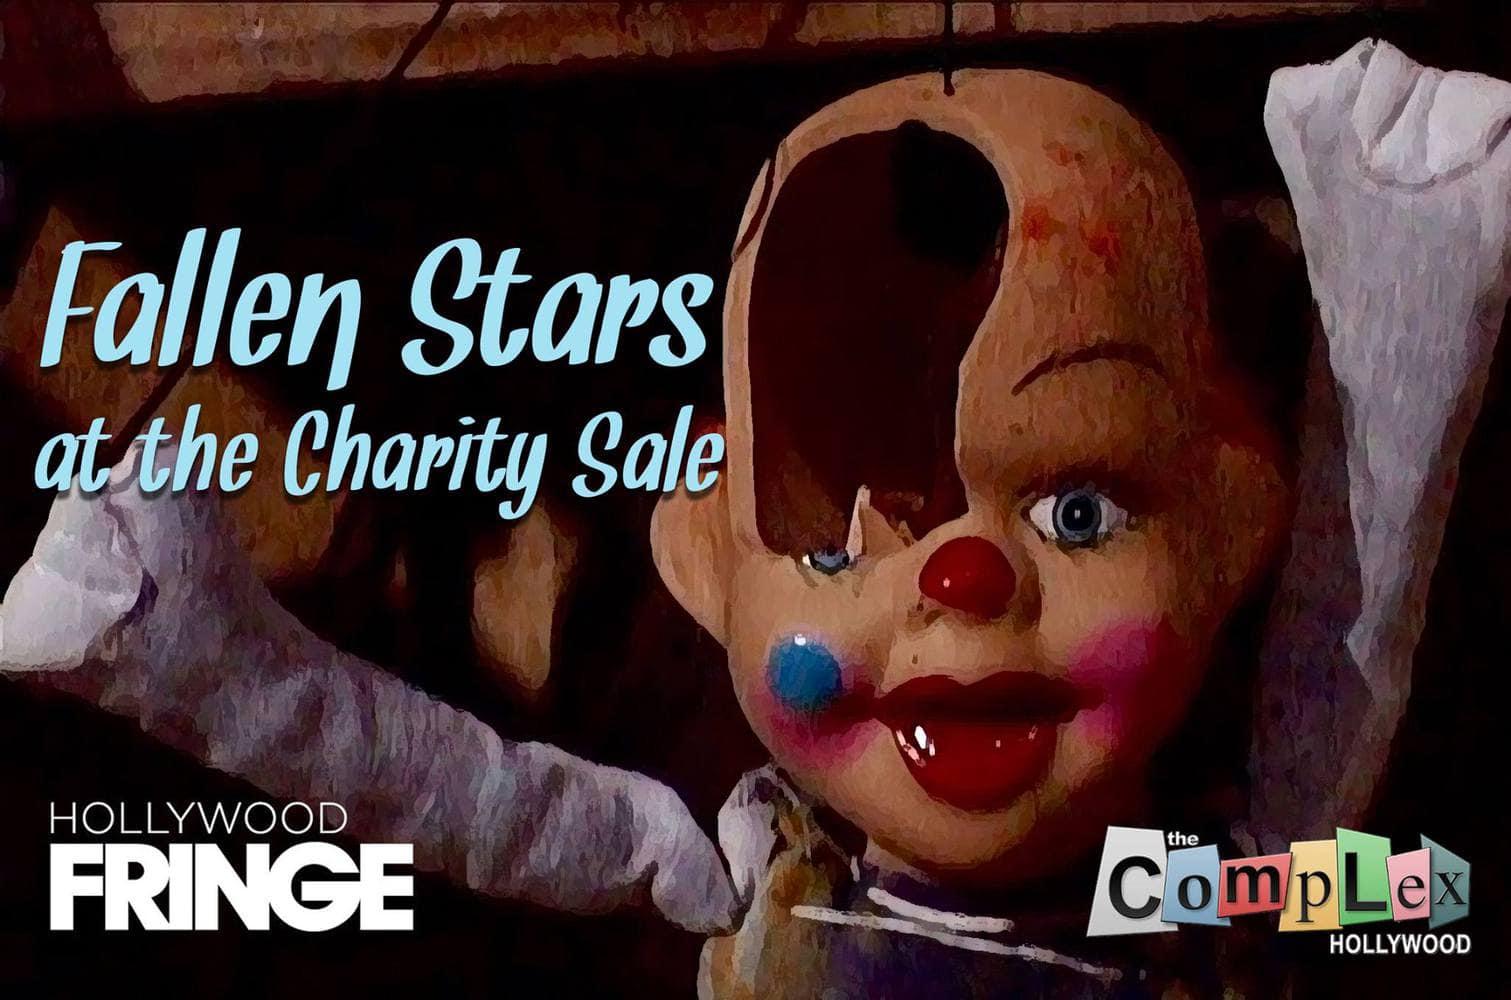 Fallen Stars Charity Sale Hollywood Fringe LA Theater Theatre LARP live action roleplay